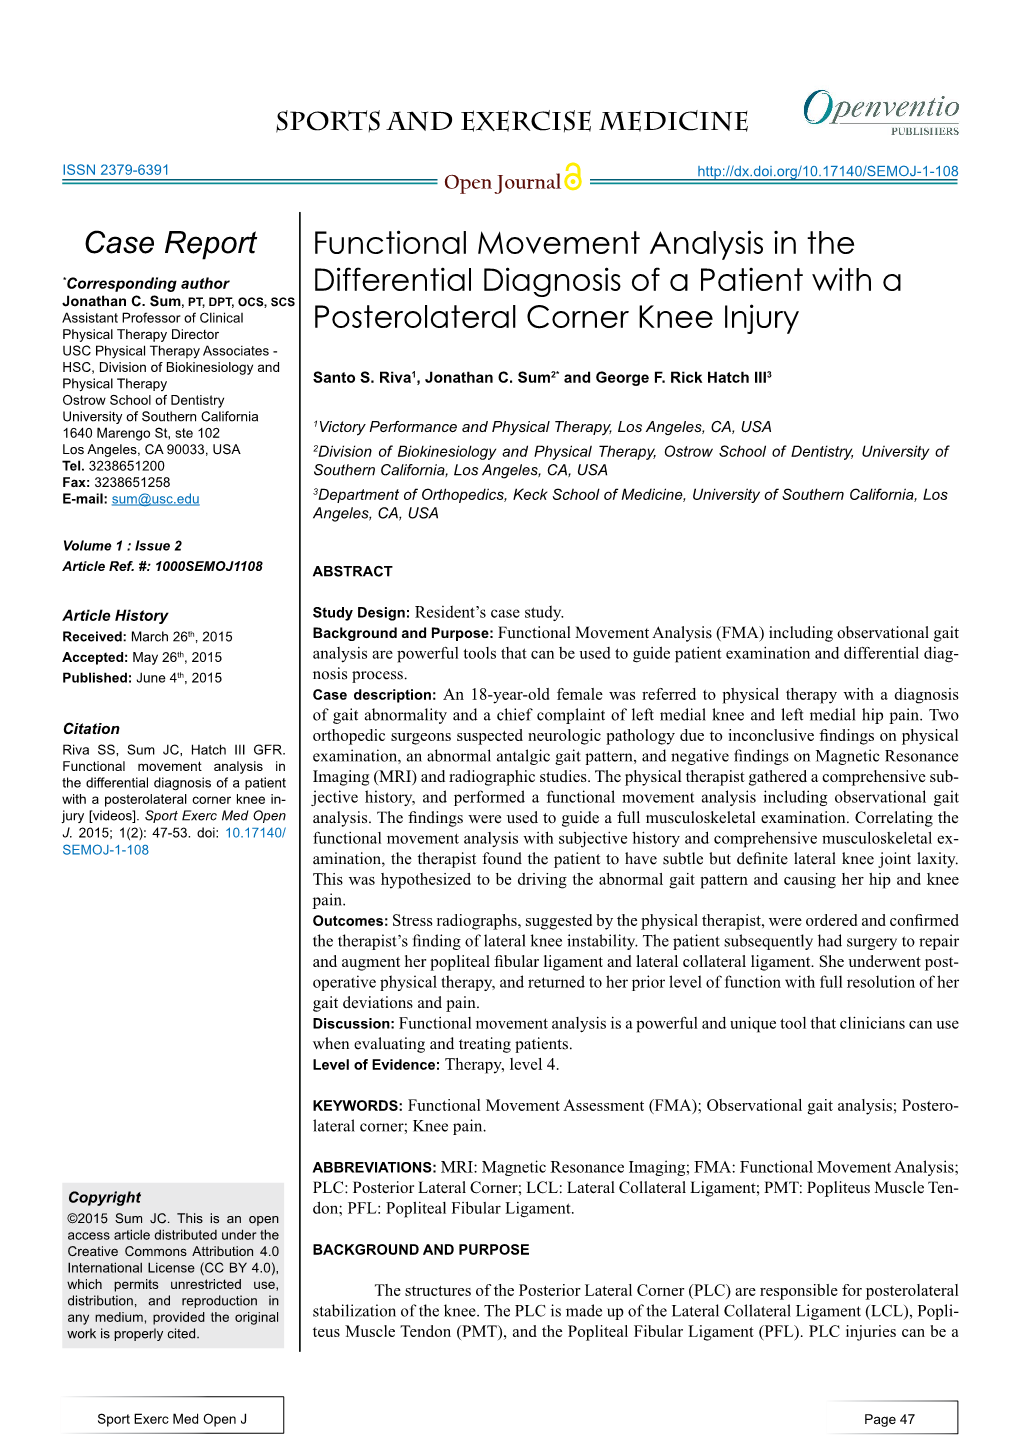 Functional Movement Analysis in the Differential Diagnosis of a Patient Imaging (MRI) and Radiographic Studies